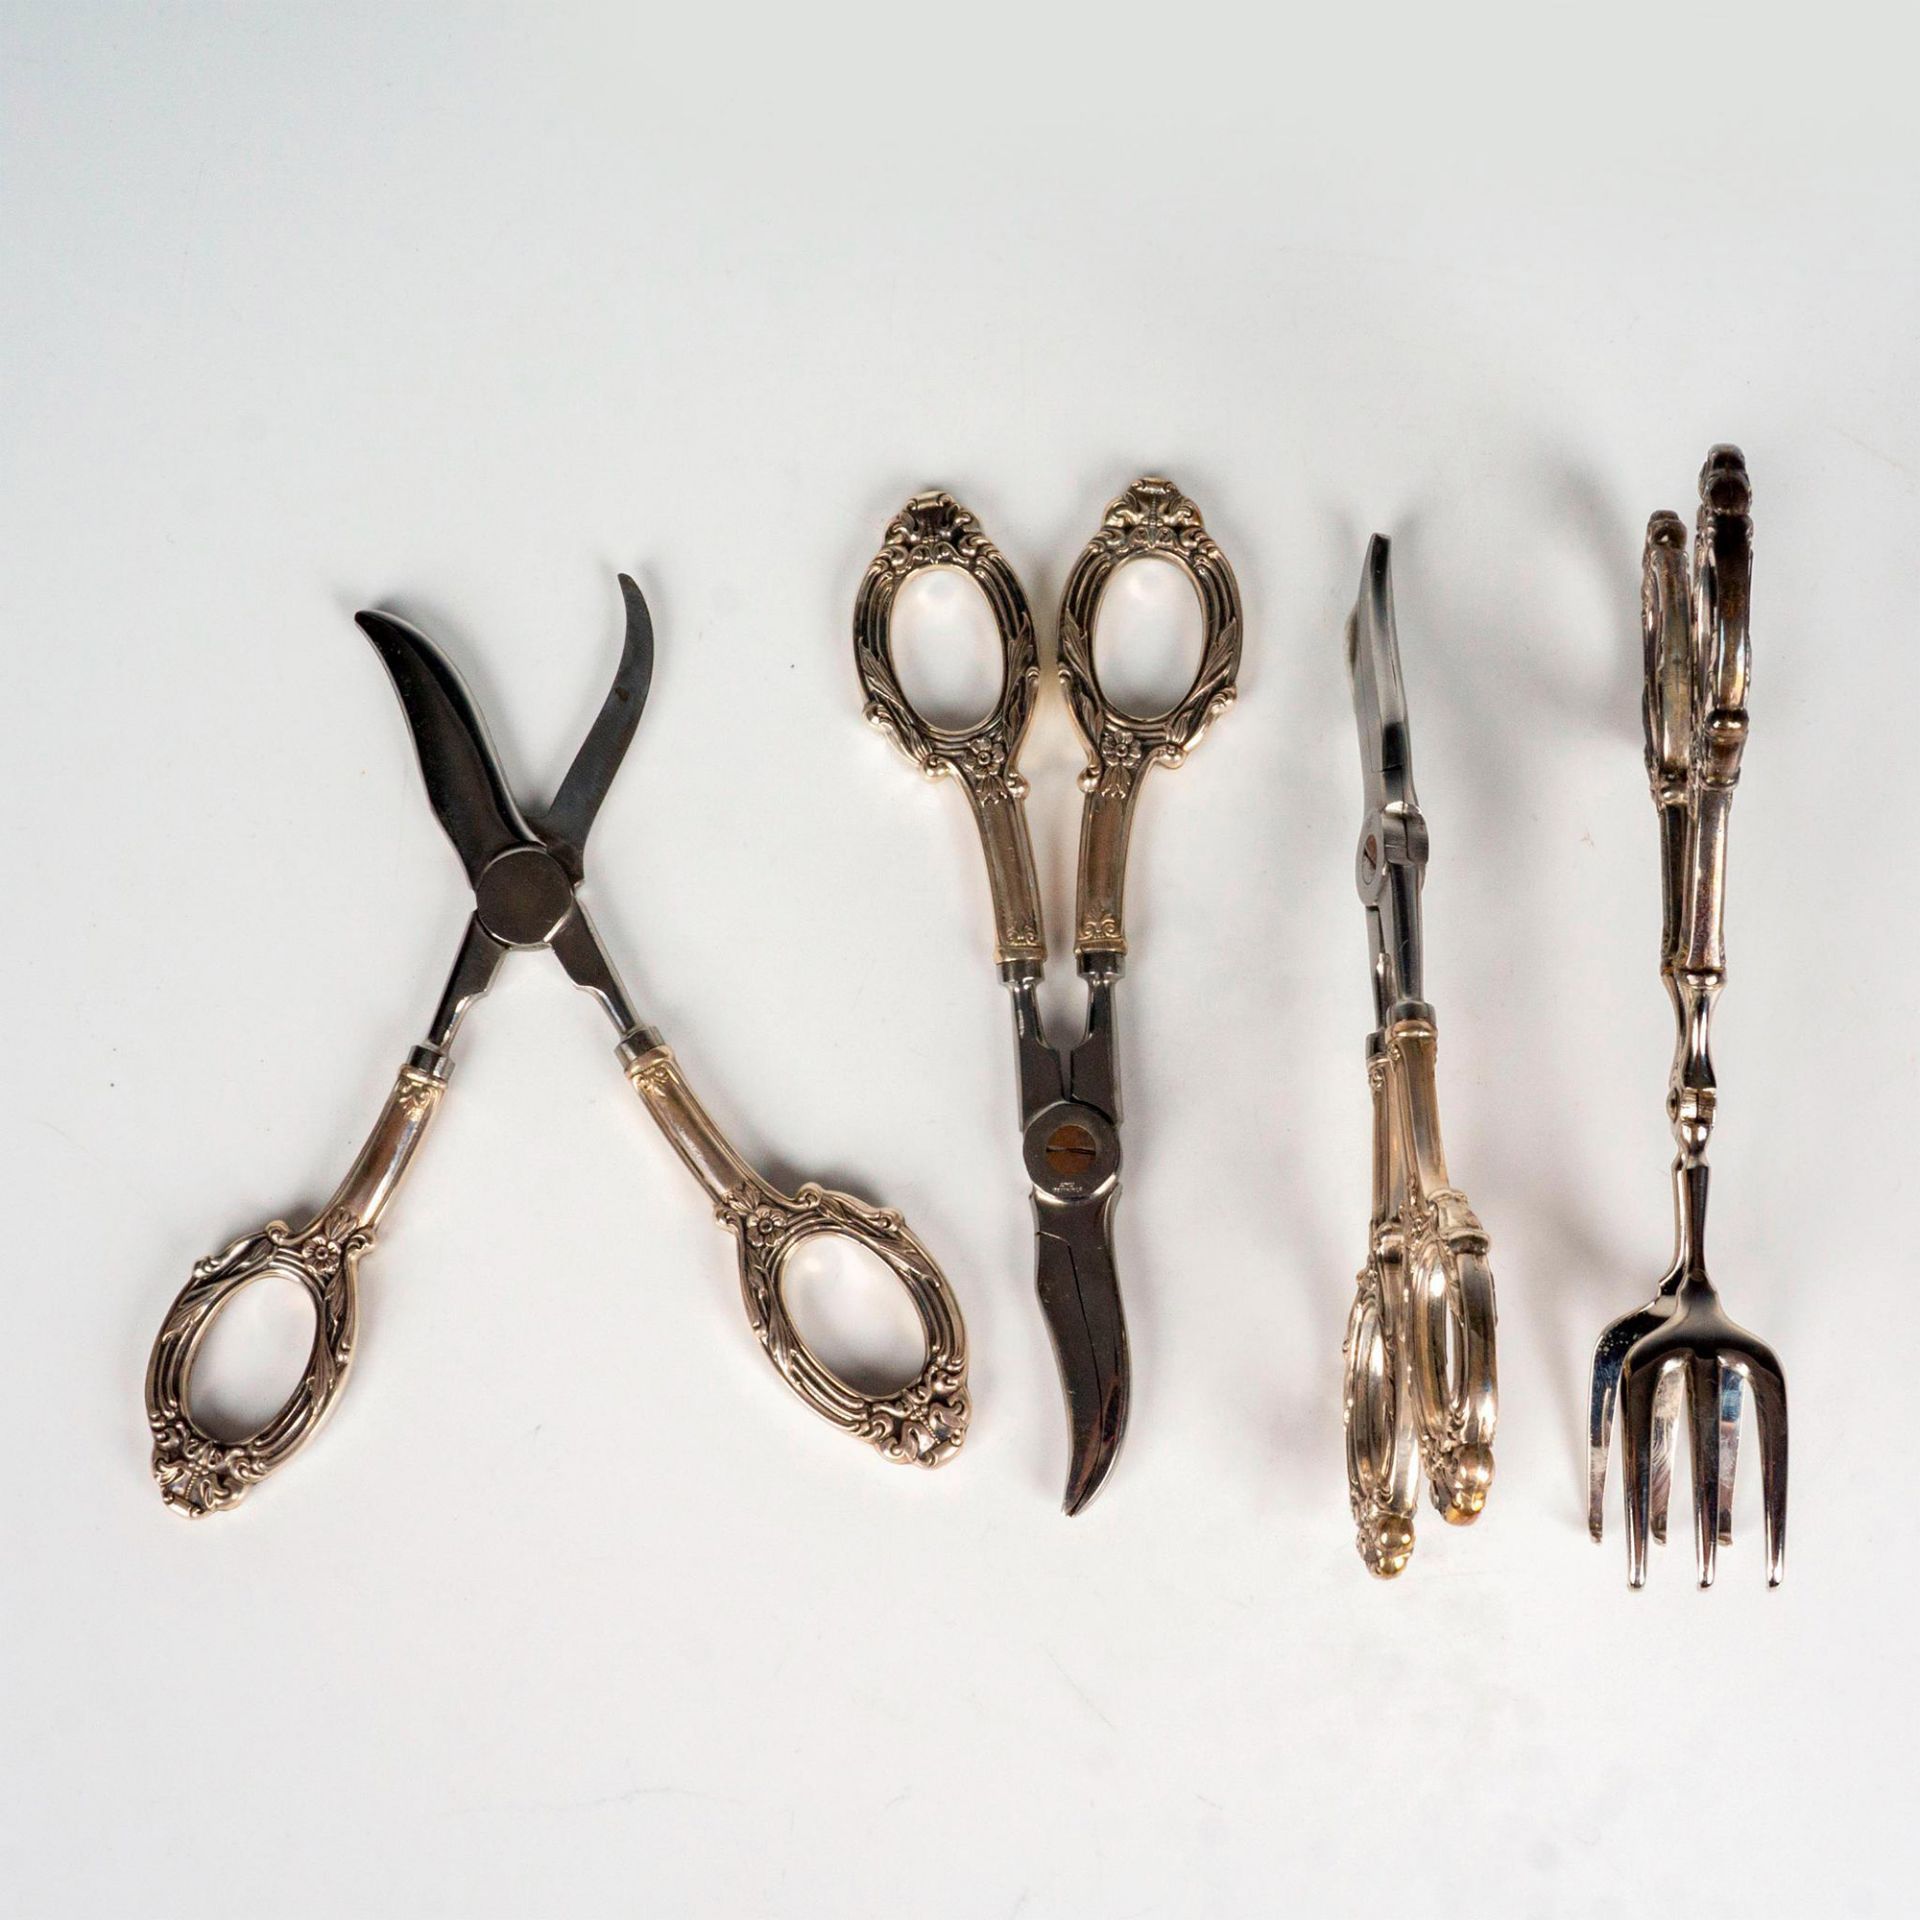 4pc Sterling Silver Italian and German Shears and Tong - Image 2 of 2